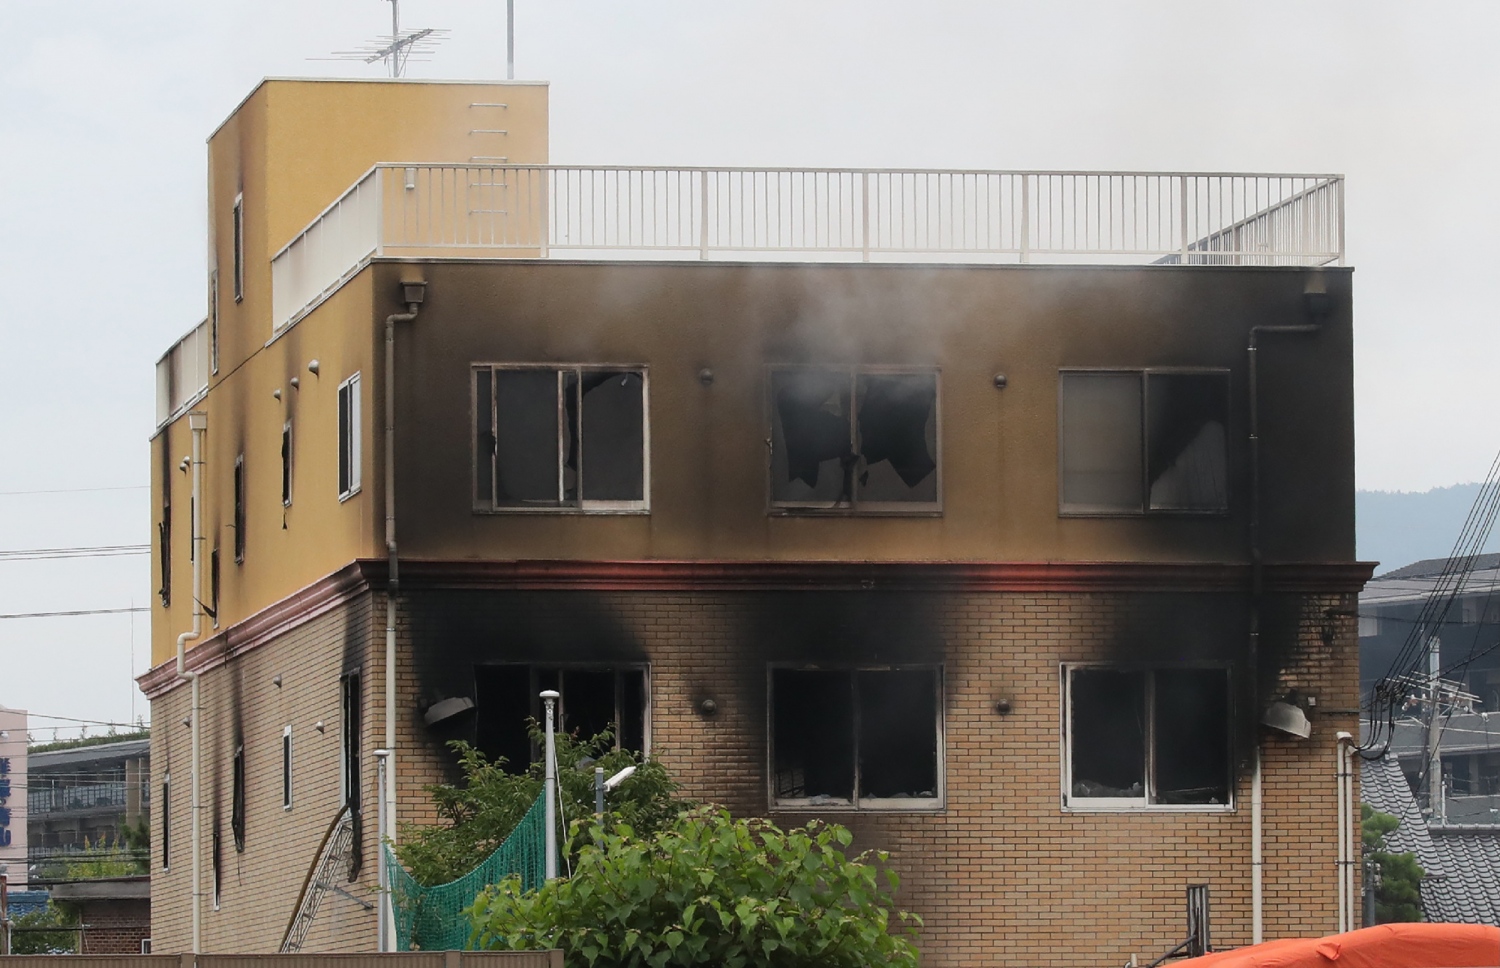 13 dead in suspected arson attack on Japan animation studio - The Edition